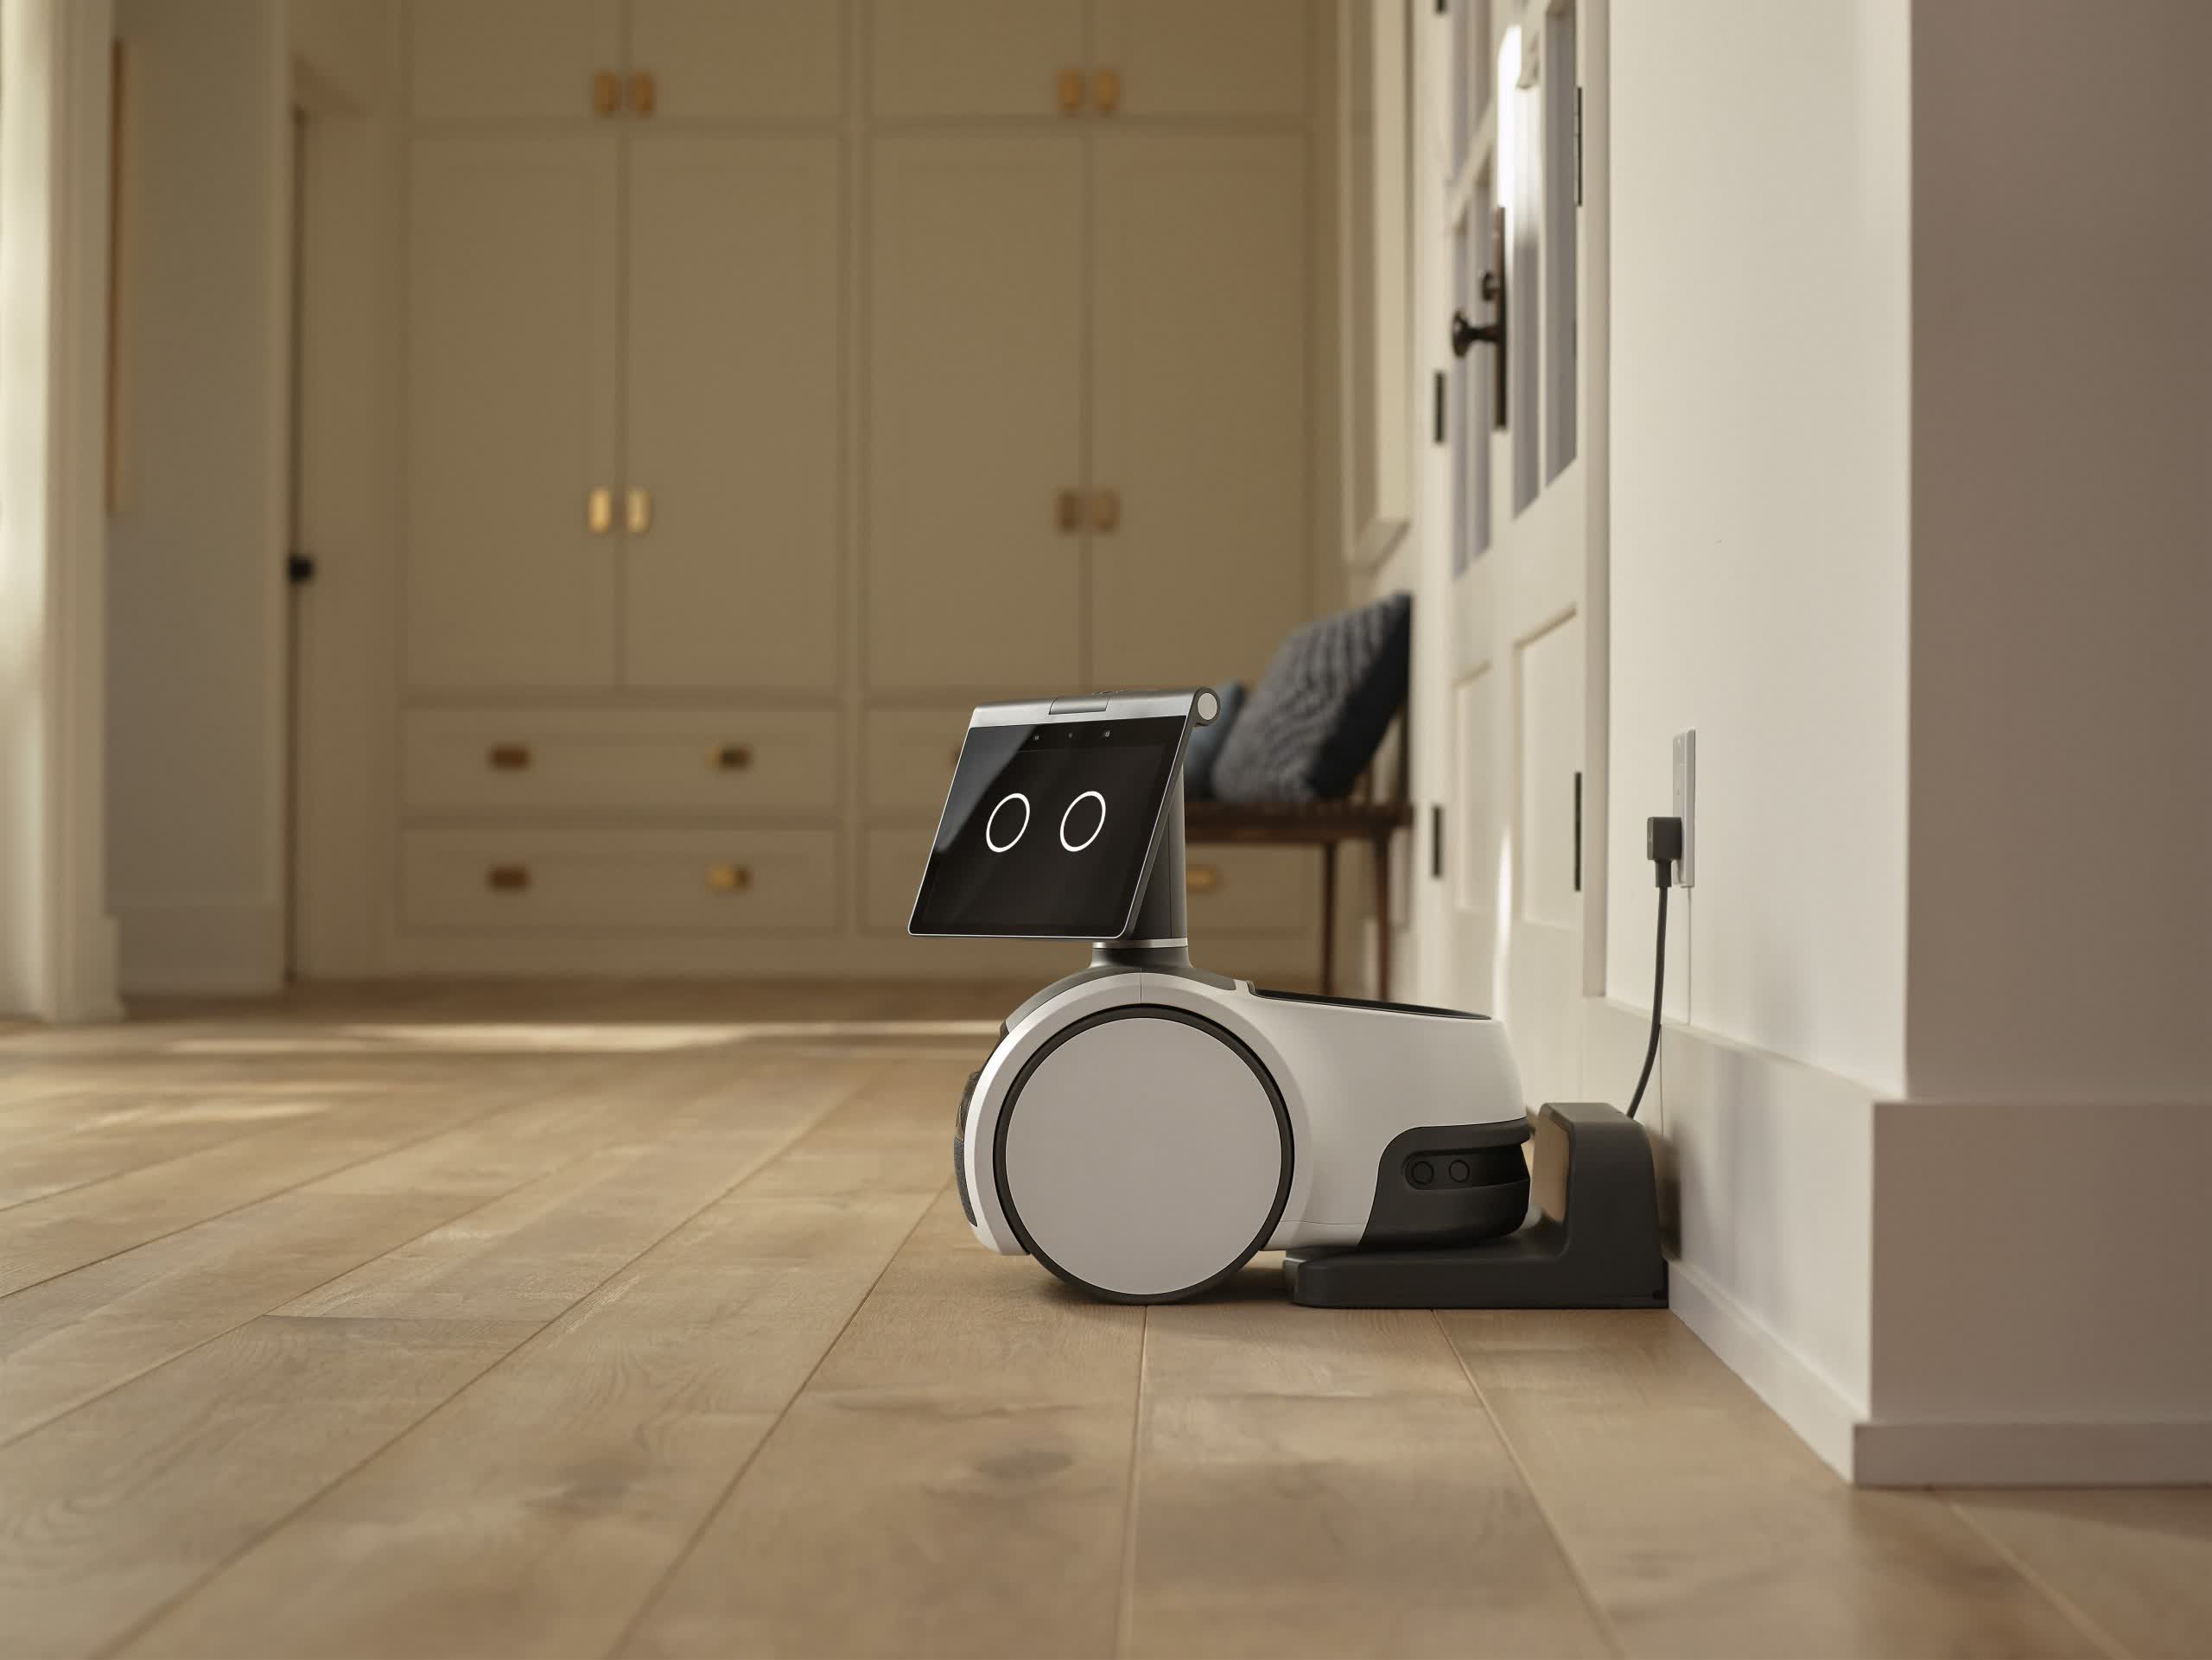 Amazon Astro brings a personal robot into your home